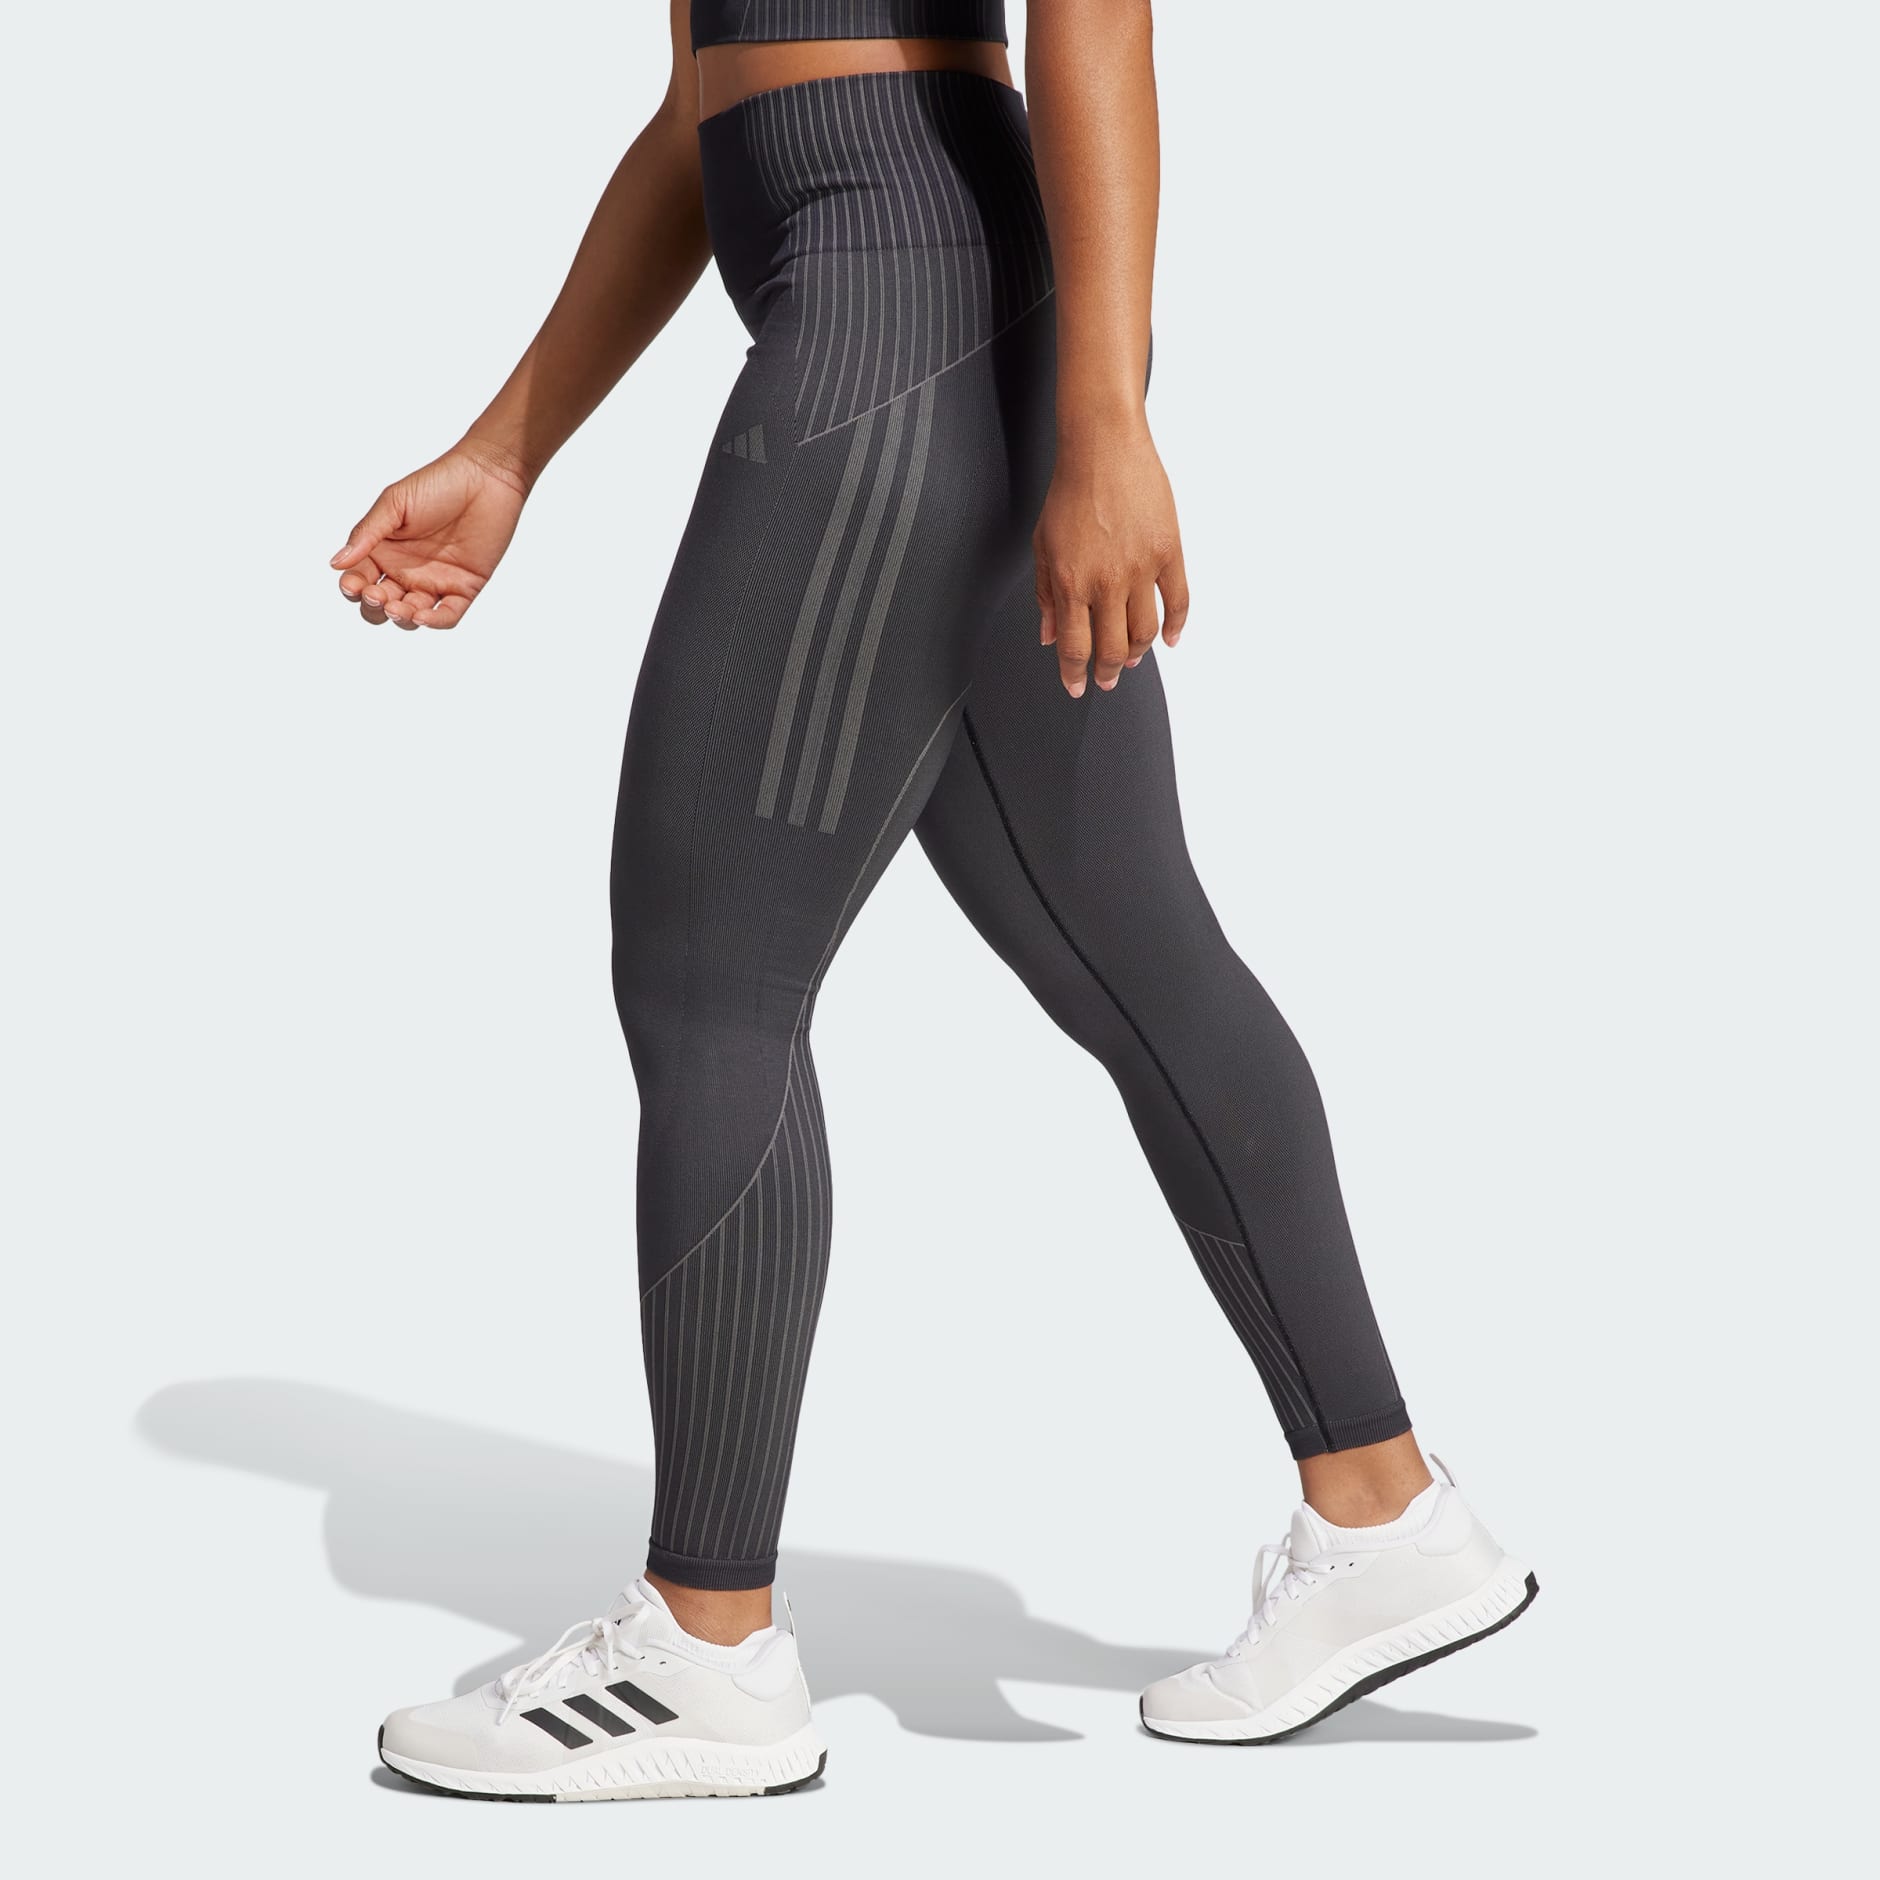 adidas Performance Seamless tights for women online - Buy now at Boozt.com